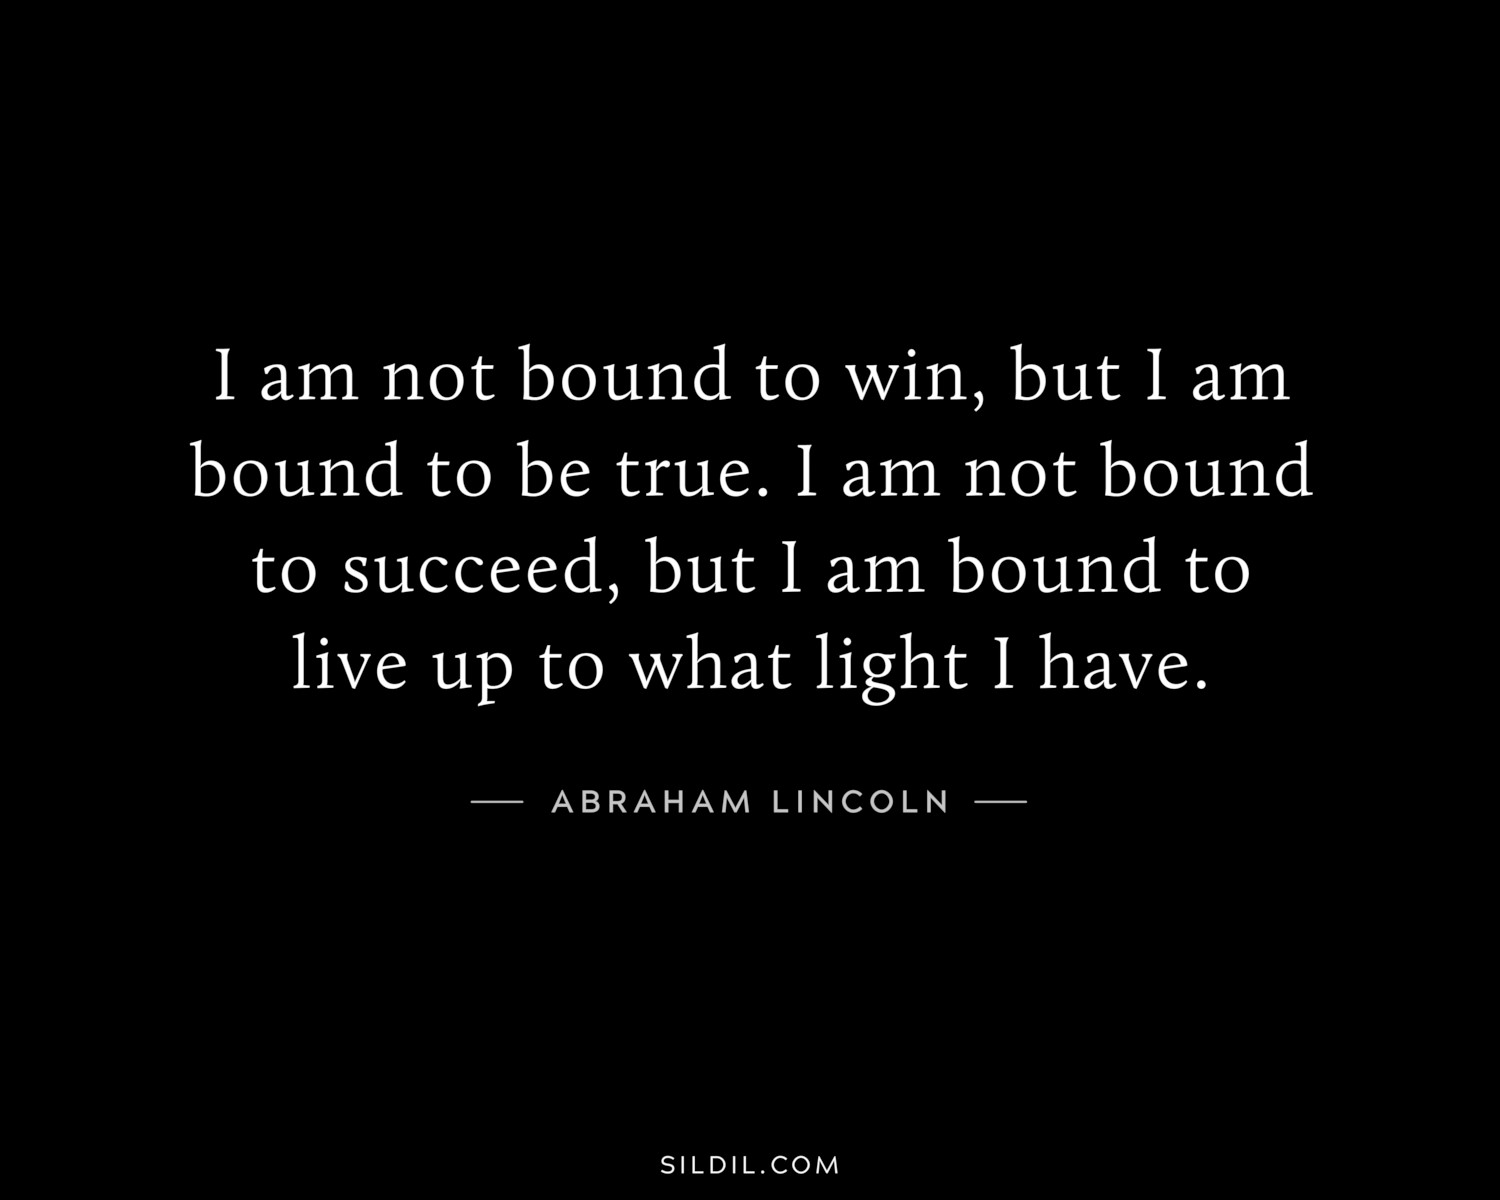 I am not bound to win, but I am bound to be true. I am not bound to succeed, but I am bound to live up to what light I have.